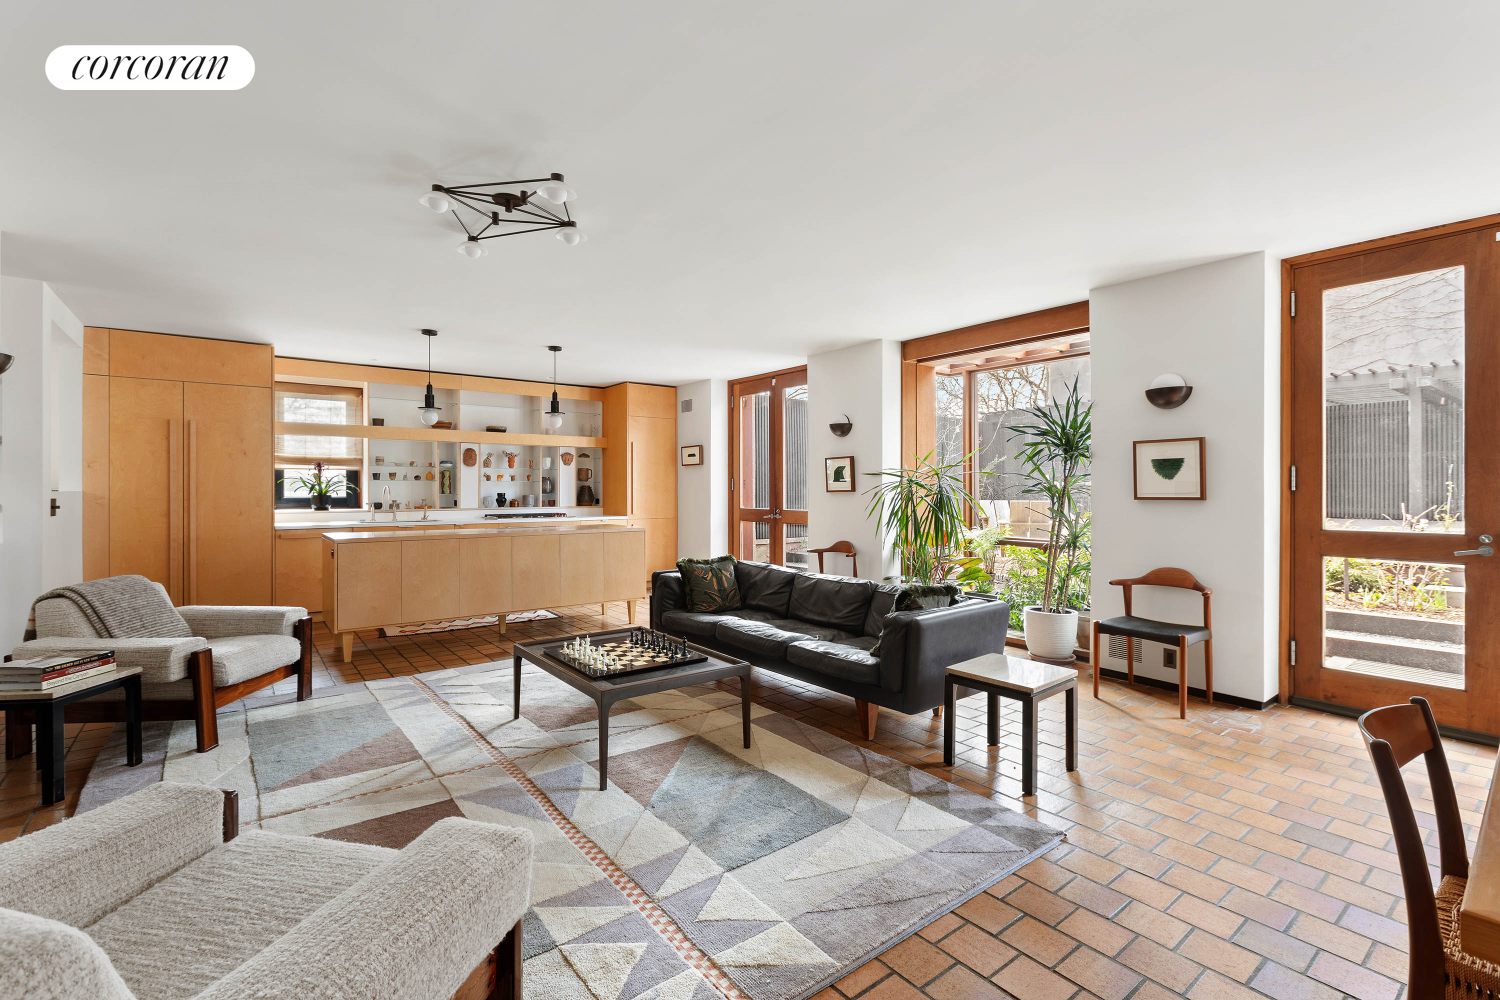 48 Willow Place, Brooklyn Heights, Brooklyn, New York - 4 Bedrooms  
4.5 Bathrooms  
15 Rooms - 